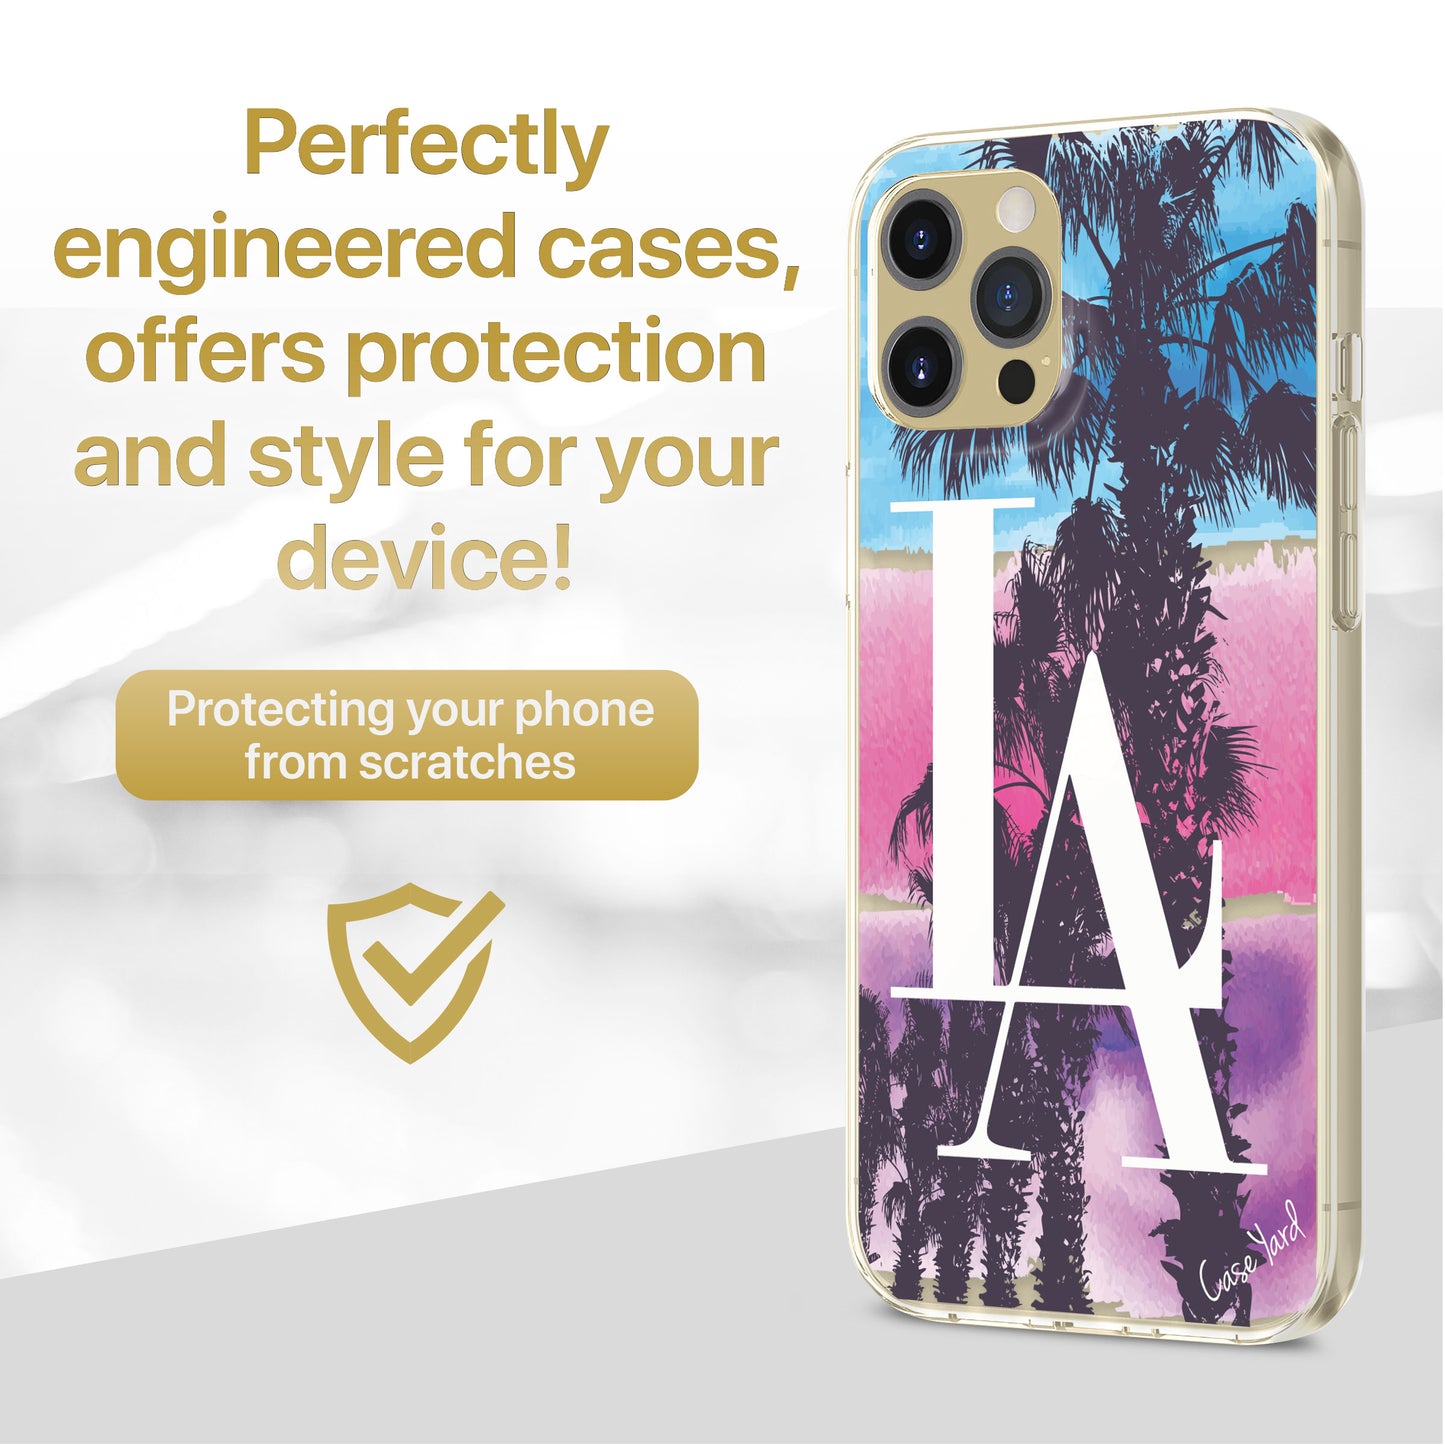 TPU Clear case with (LA) Design for iPhone & Samsung Phones